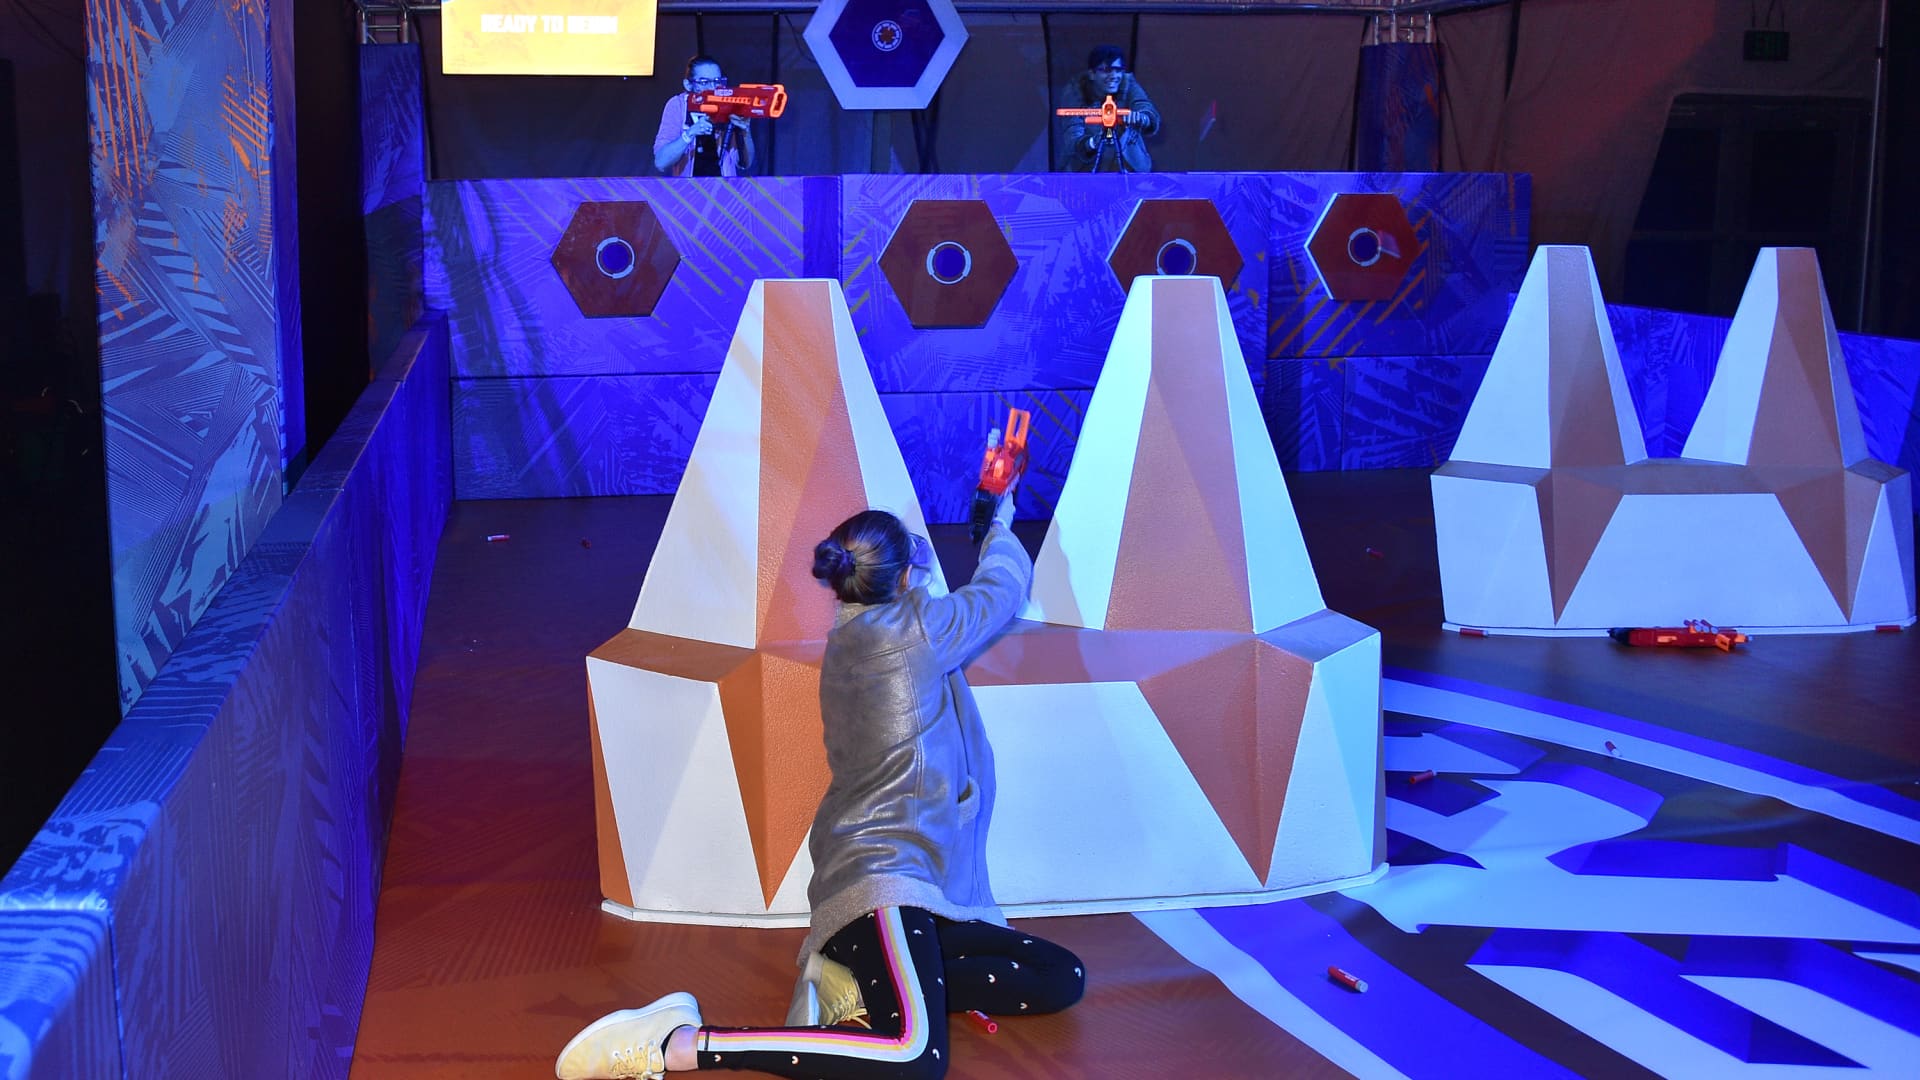 A guest attends the NERF Challenge World Premiere at L.A. Live Event Deck on December 5, 2019 in Los Angeles, California. NERF Challenge is a touring live stage and fan experience that brings the action and competitive fun of the NERF brand to life, and will travel across select US and Canada markets in 2020 following its Los Angeles run.